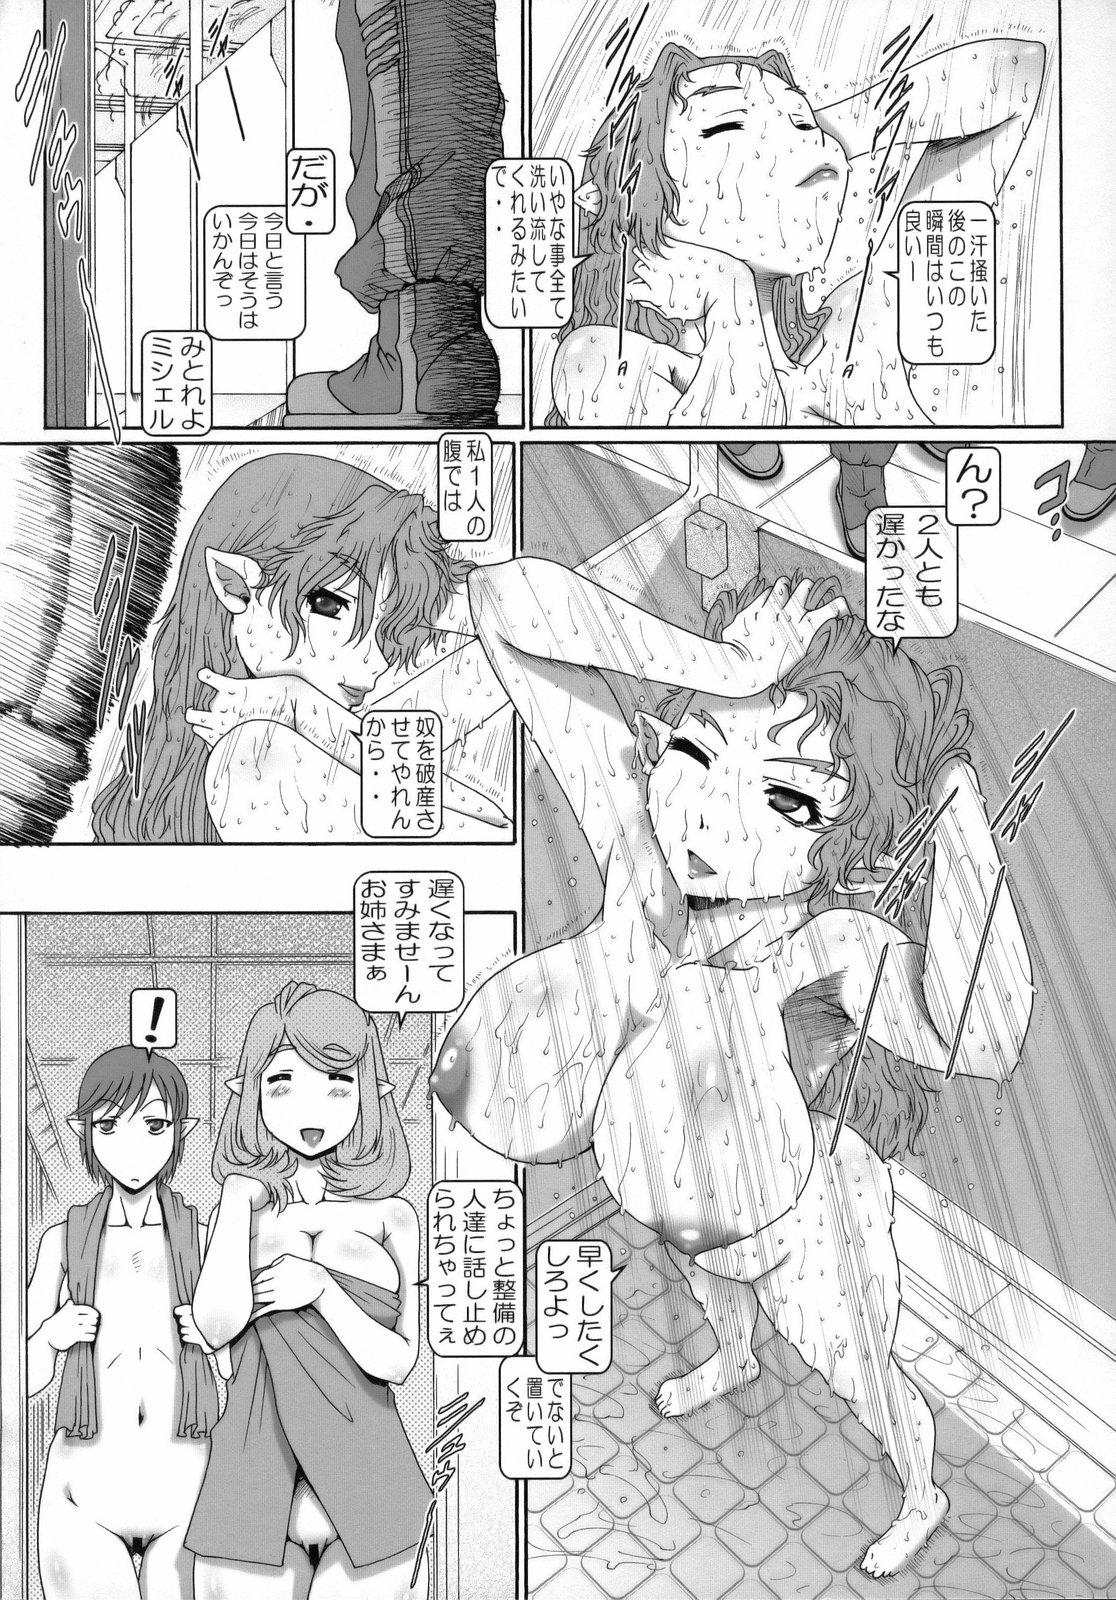 Kink PUCHI EMPIRE 2008 SUMMER - Macross frontier Gay Anal - Page 9